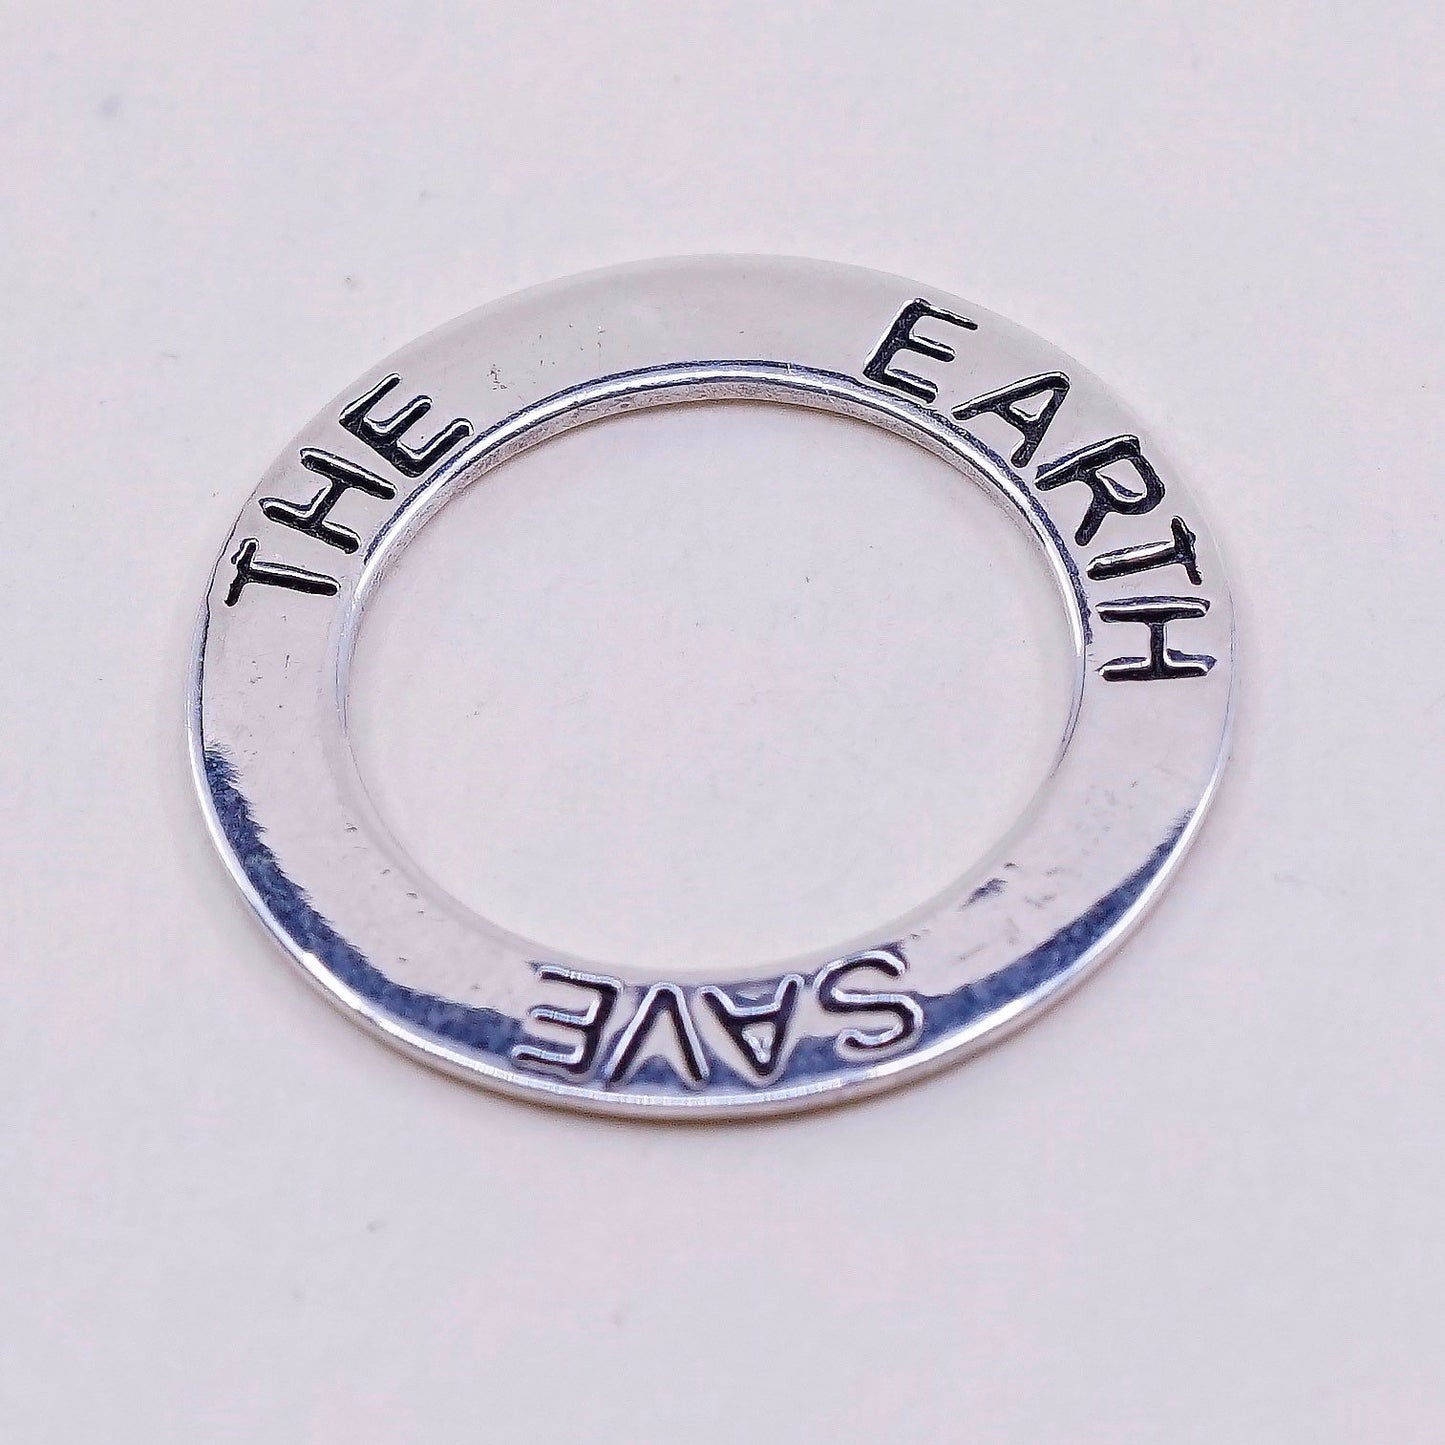 Vintage sterling silver handmade pendant, 925 circle embossed ”save the earth”